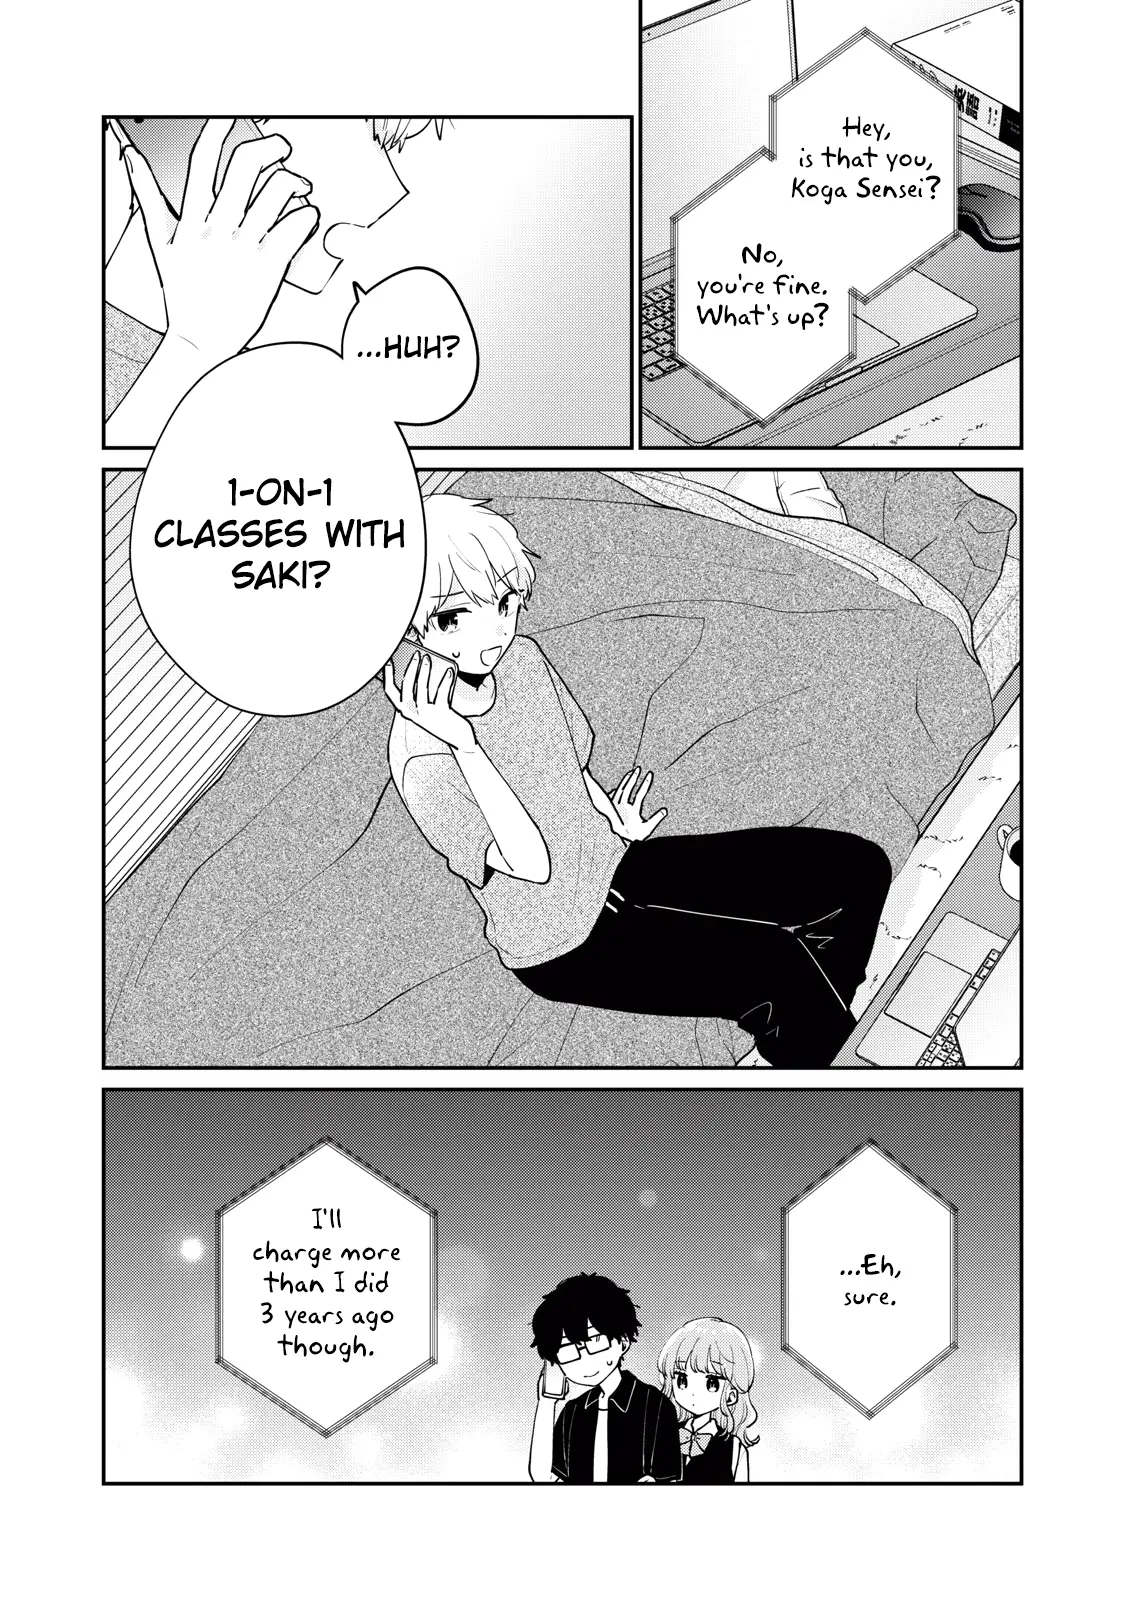 It's Not Meguro-San's First Time - 74 page 17-08447b7b